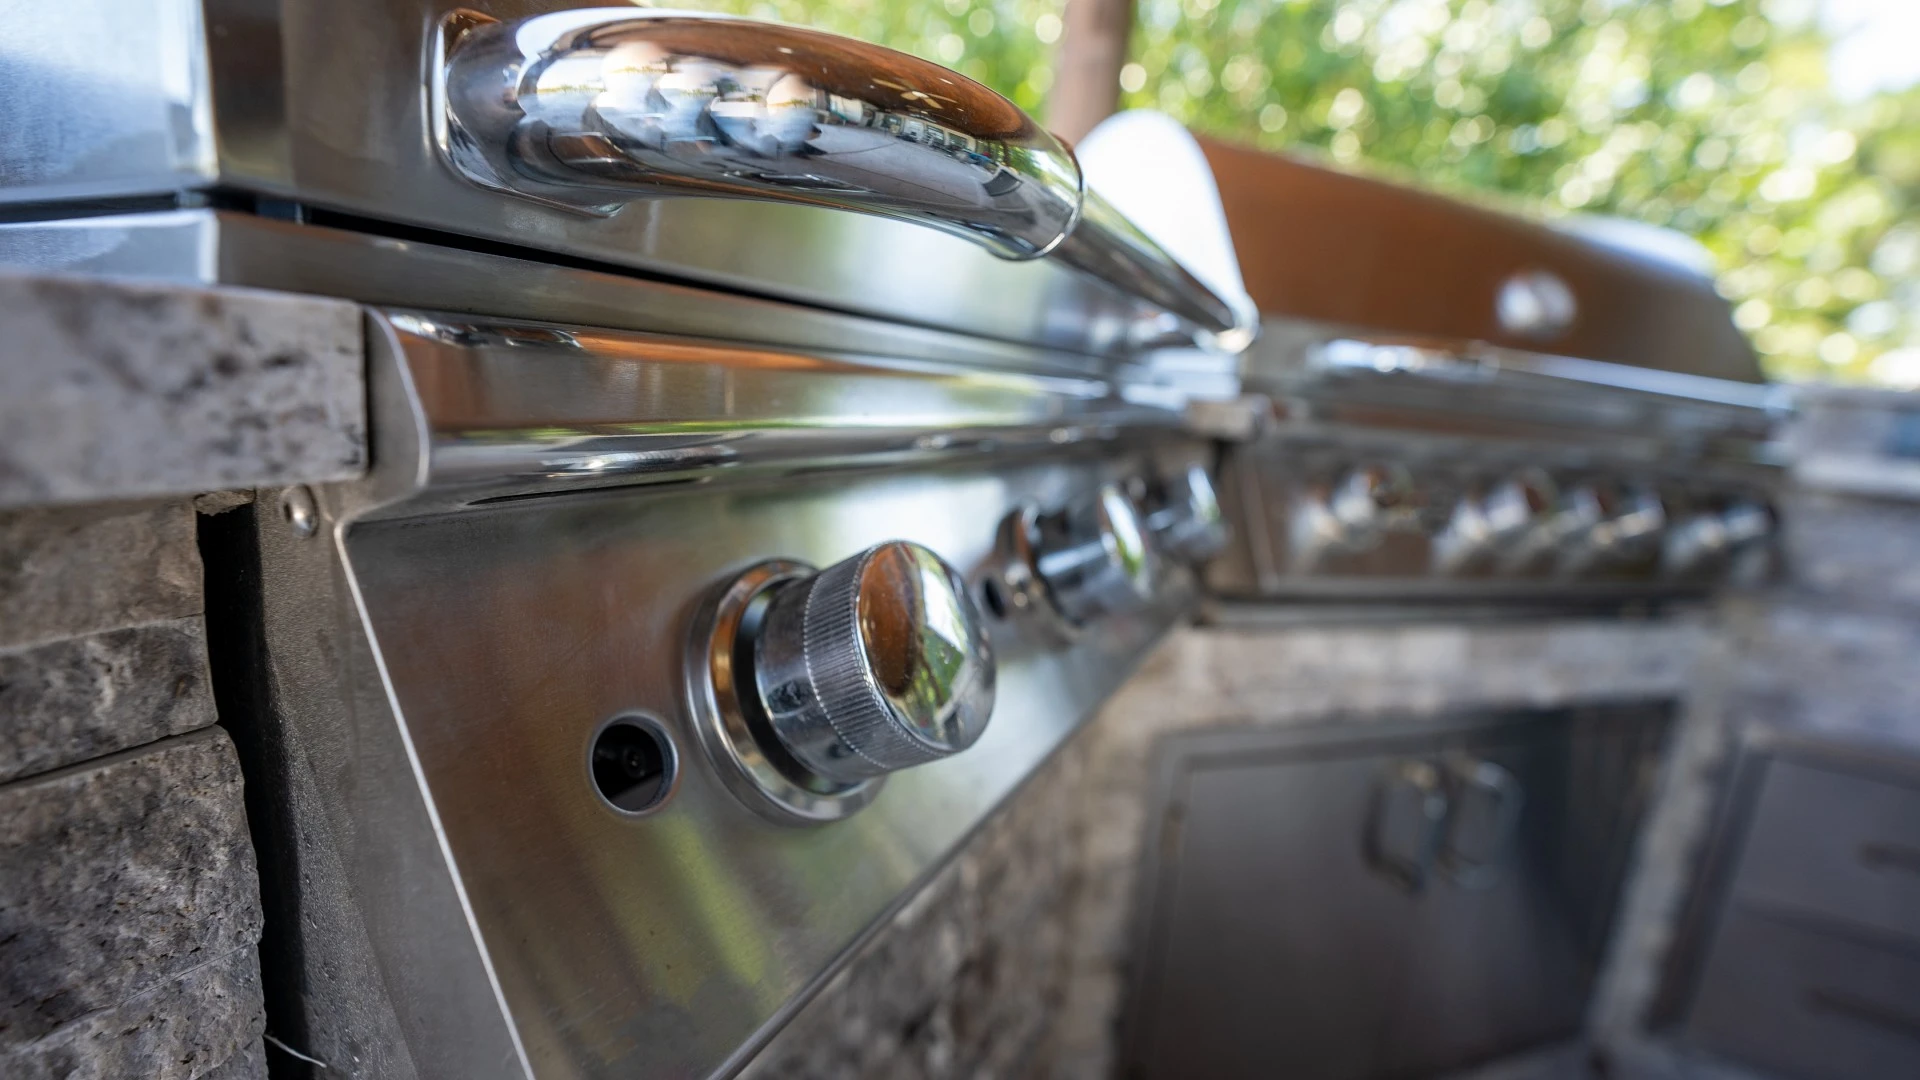 3 Things to Consider When Designing an Outdoor Kitchen